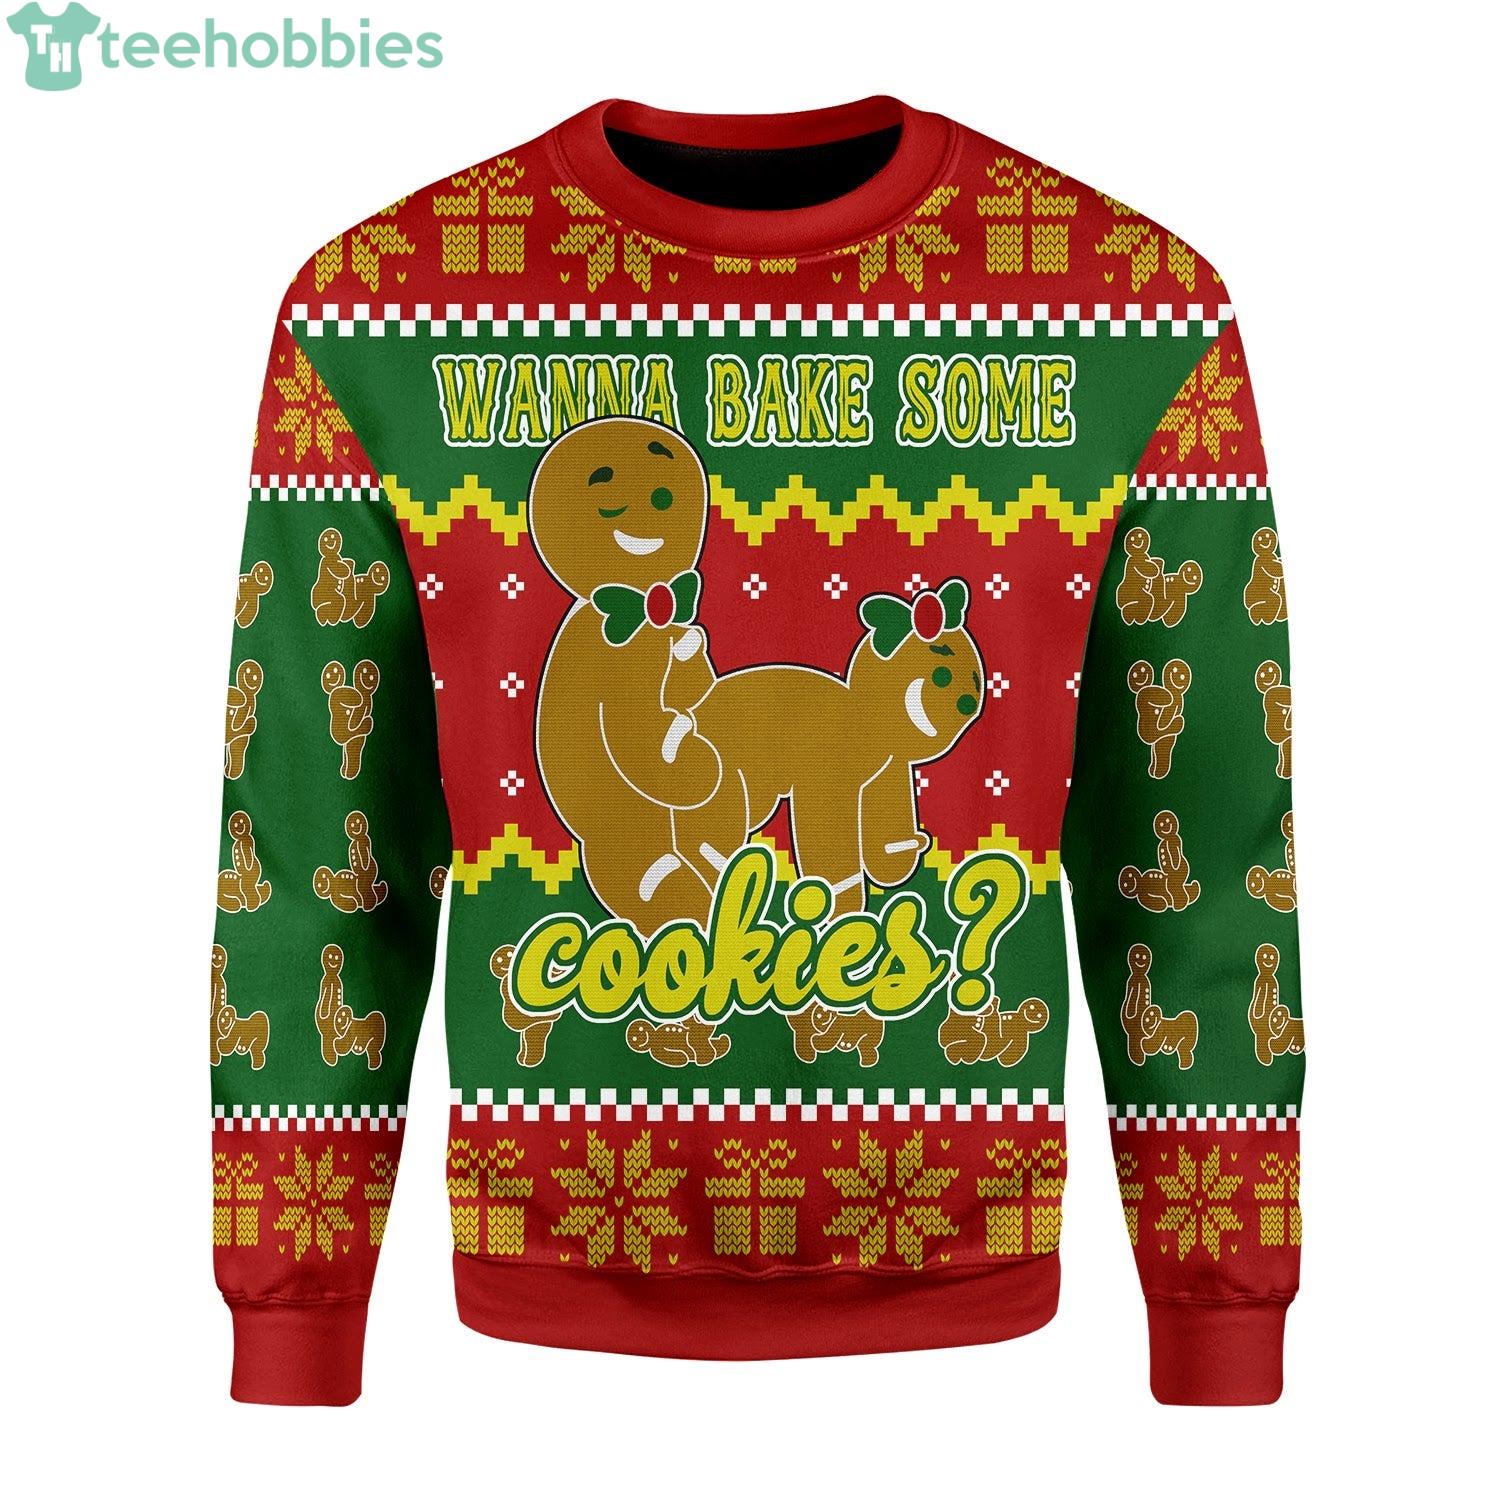 It's Ugly Christmas Sweater Time! – Biscuits 'n Crazy